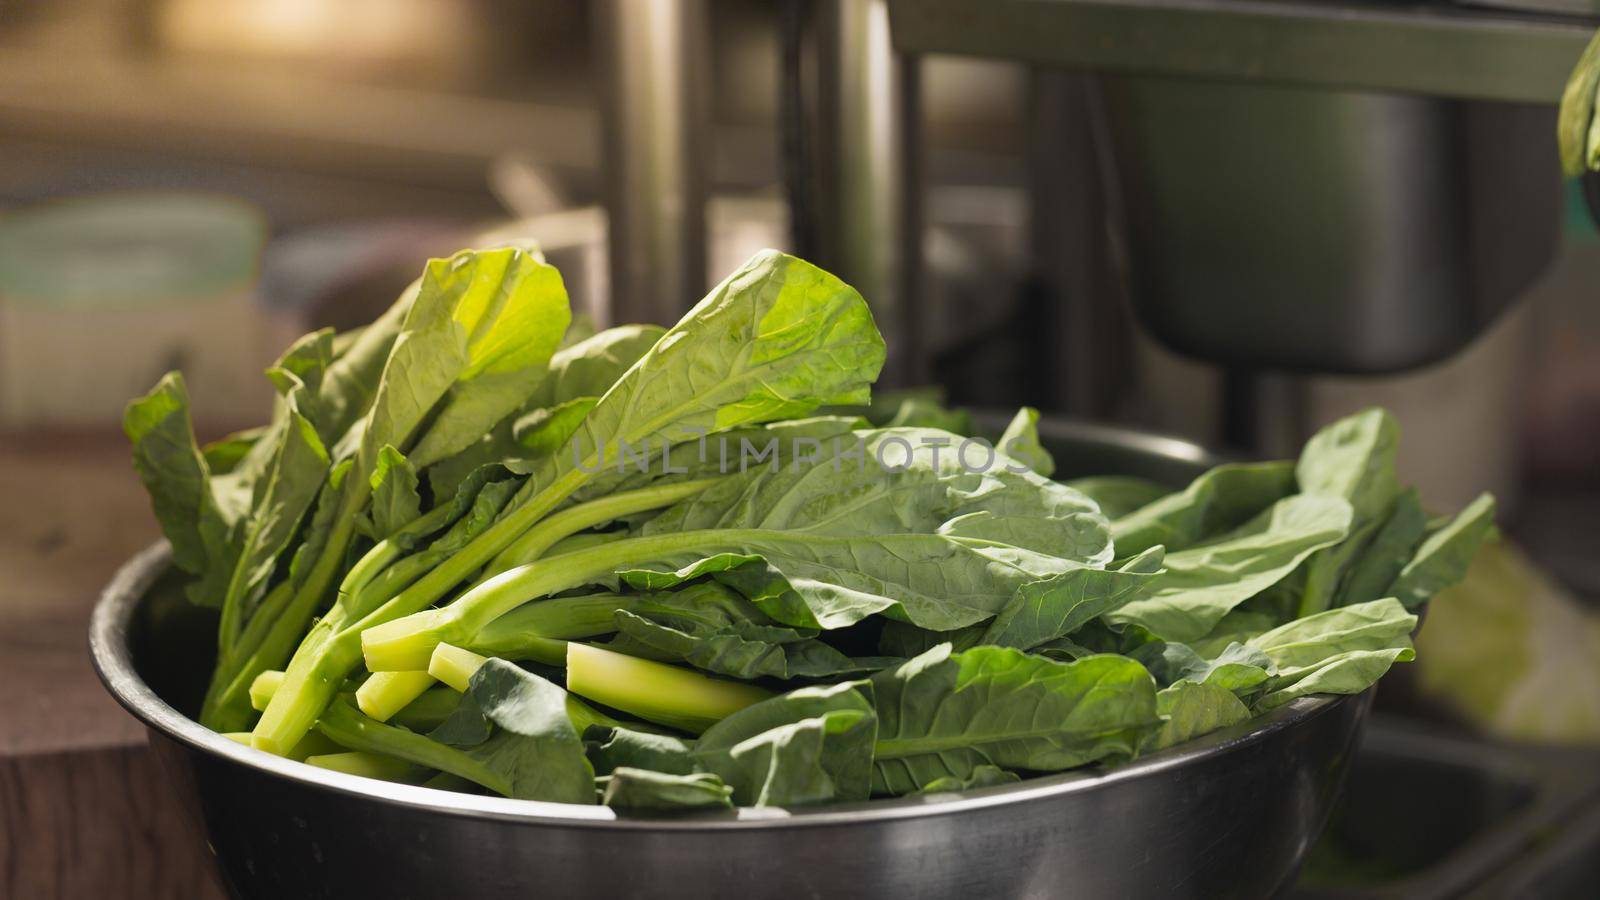 Kale vegetable in a basin prepared for cooking